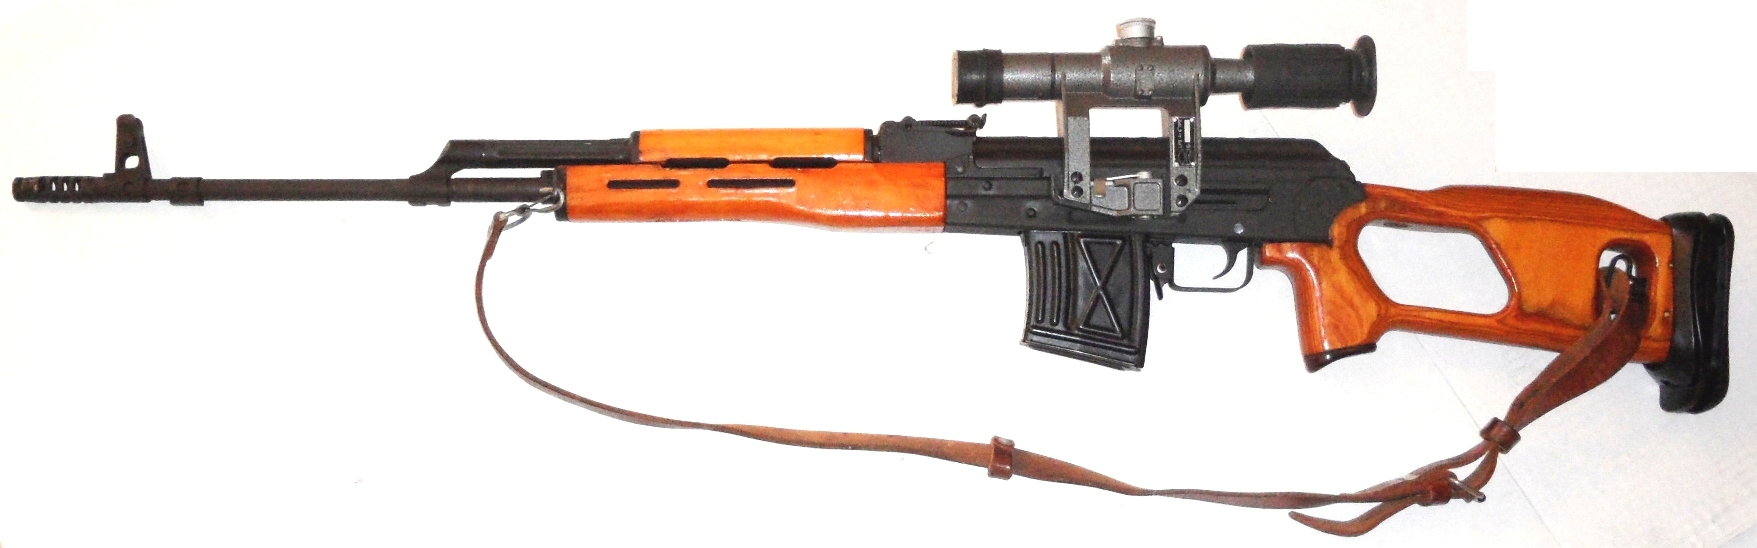 Image of completed PSL rifle